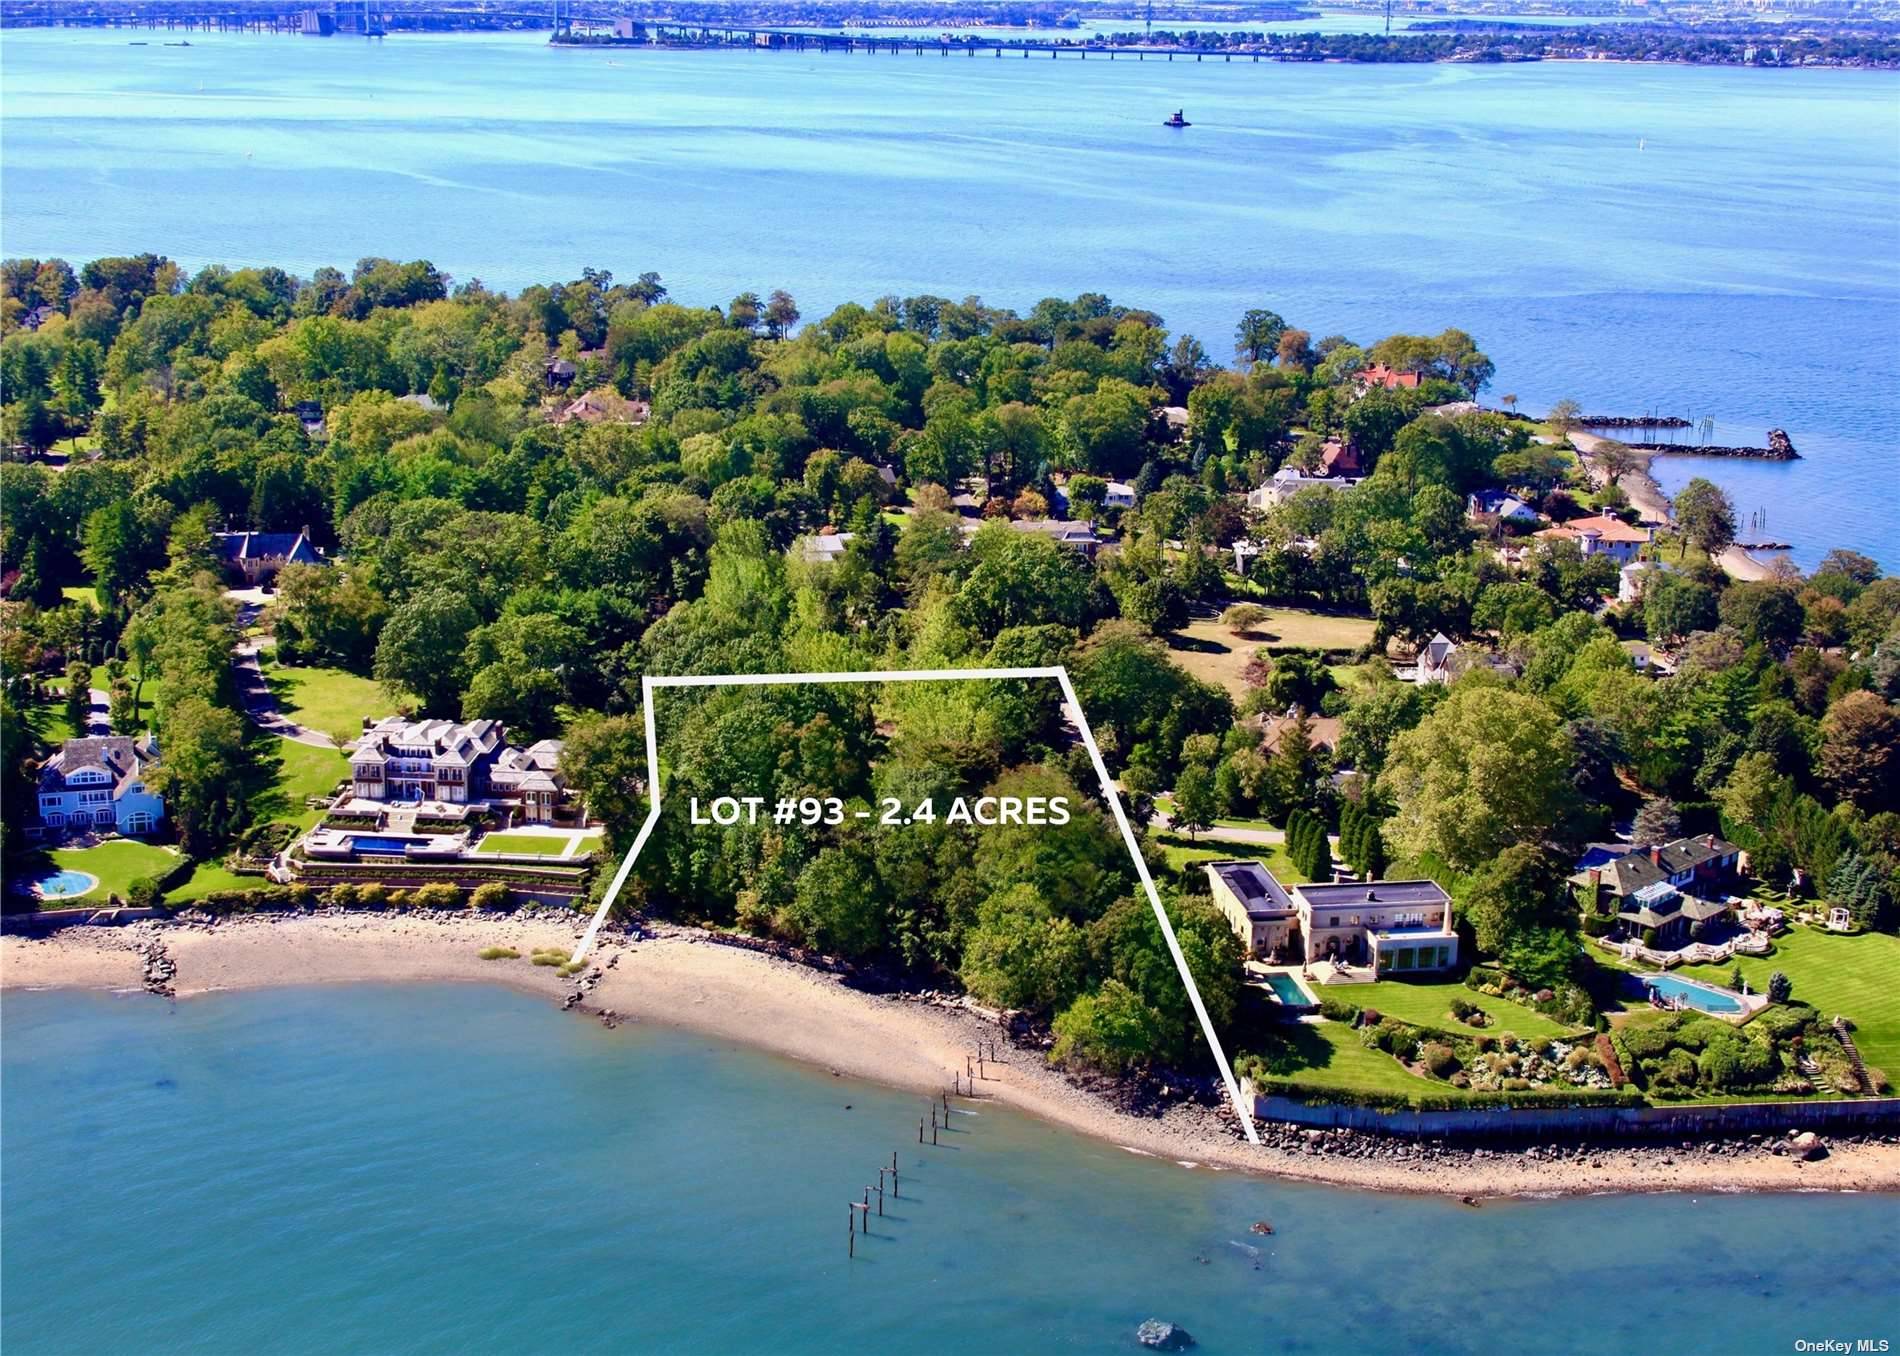 An expansive 2. 4 Acres of prime property, with approximately 430 feet of water frontage, located on one of the most sought after streets in the prestigious Village of Kings ...